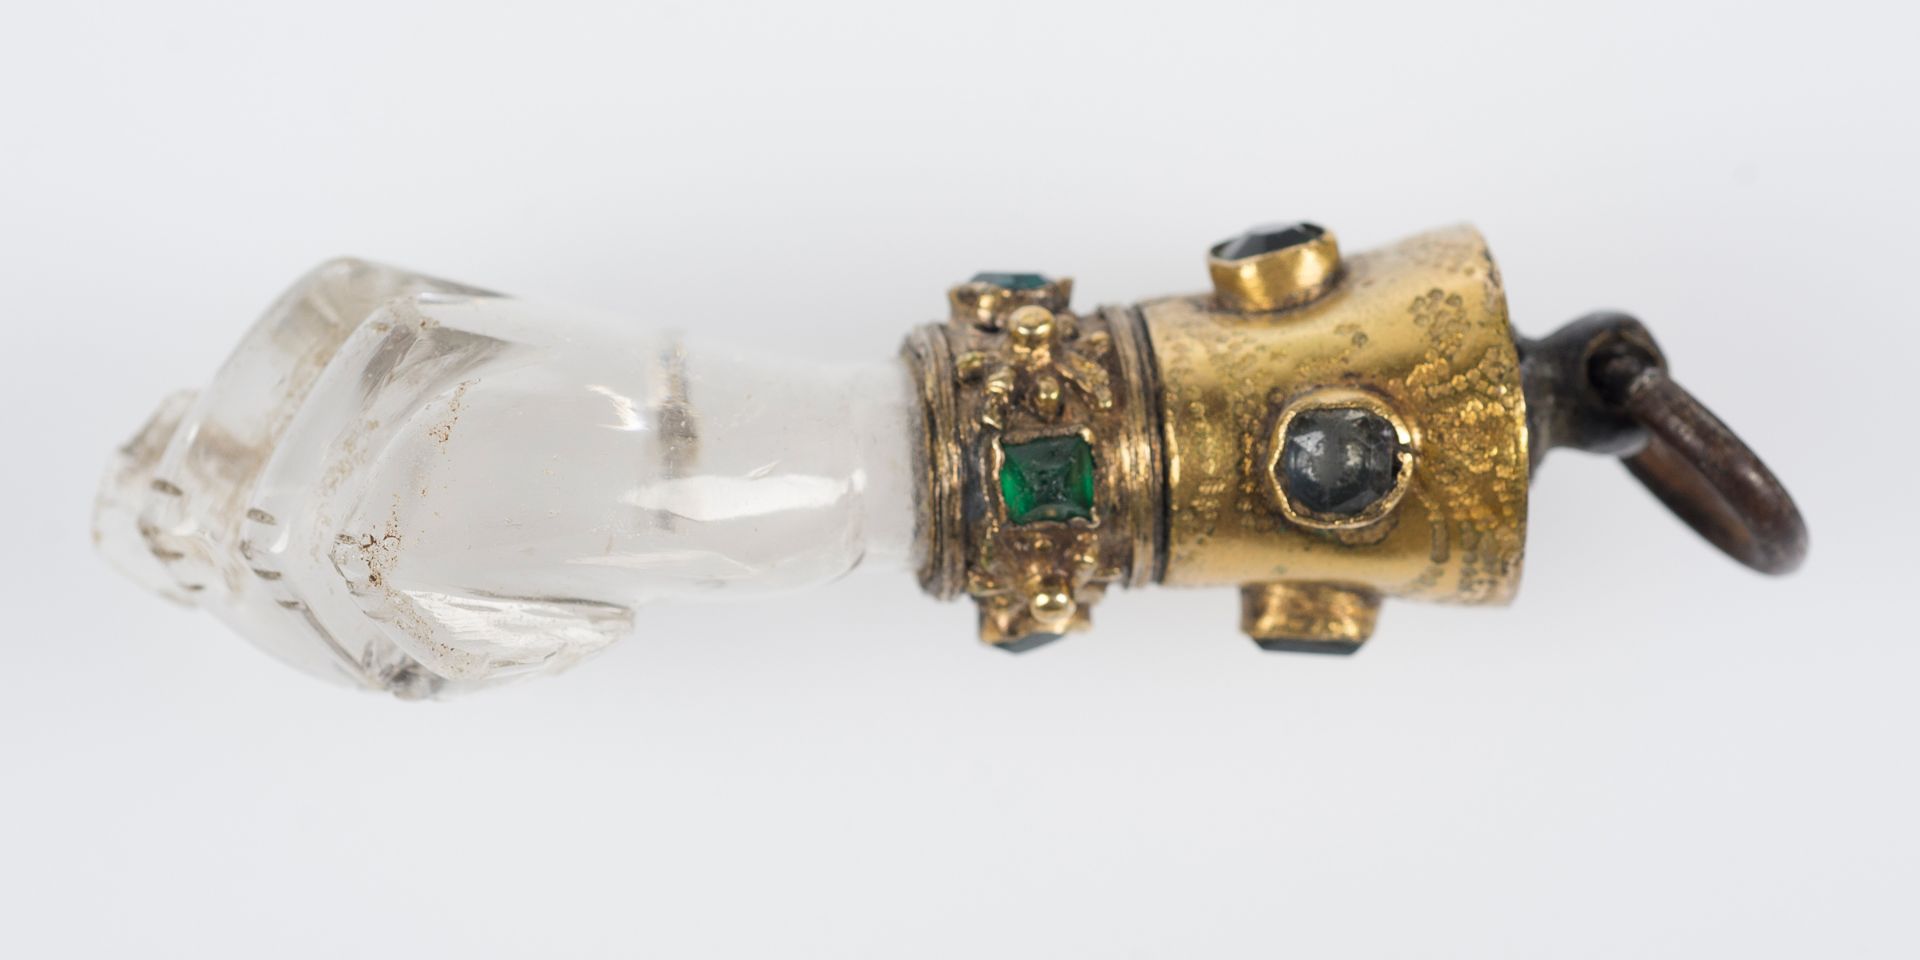 Rock crystal and gilded copper figa with precious stone cabochons. Gothic. 15th century. - Image 5 of 7